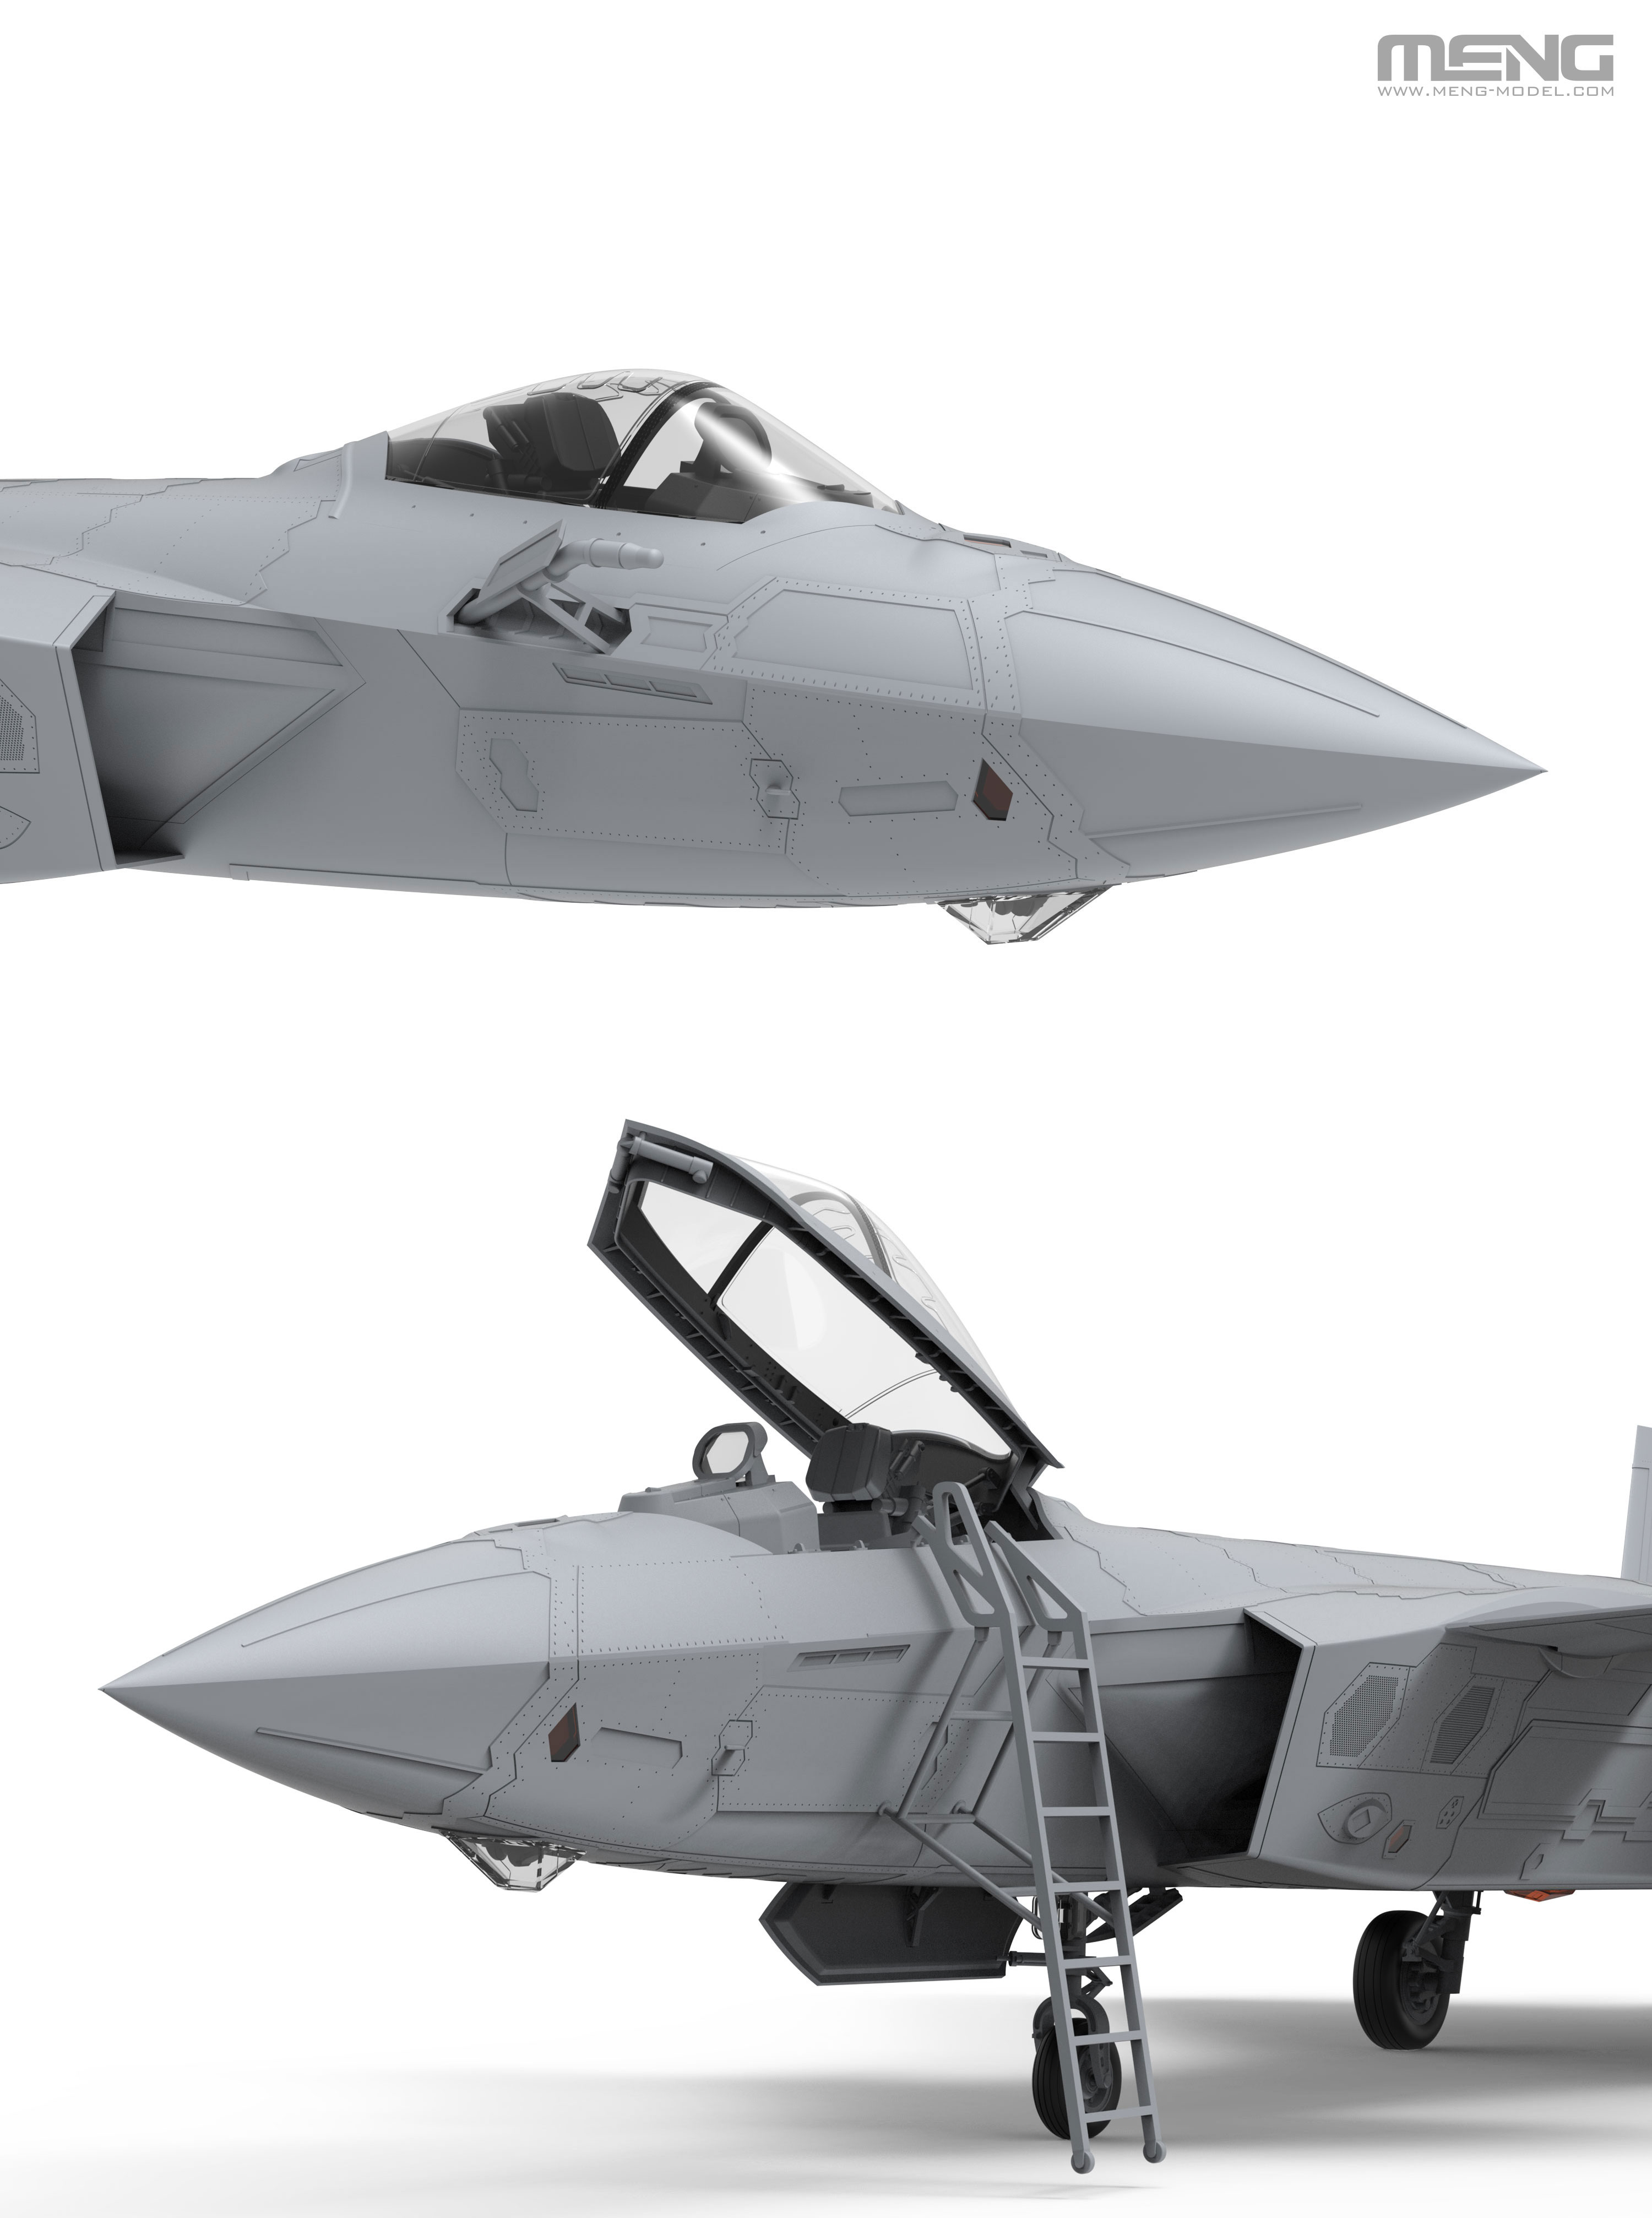 1/48 Chinese J-20 Stealth Fighter - Click Image to Close